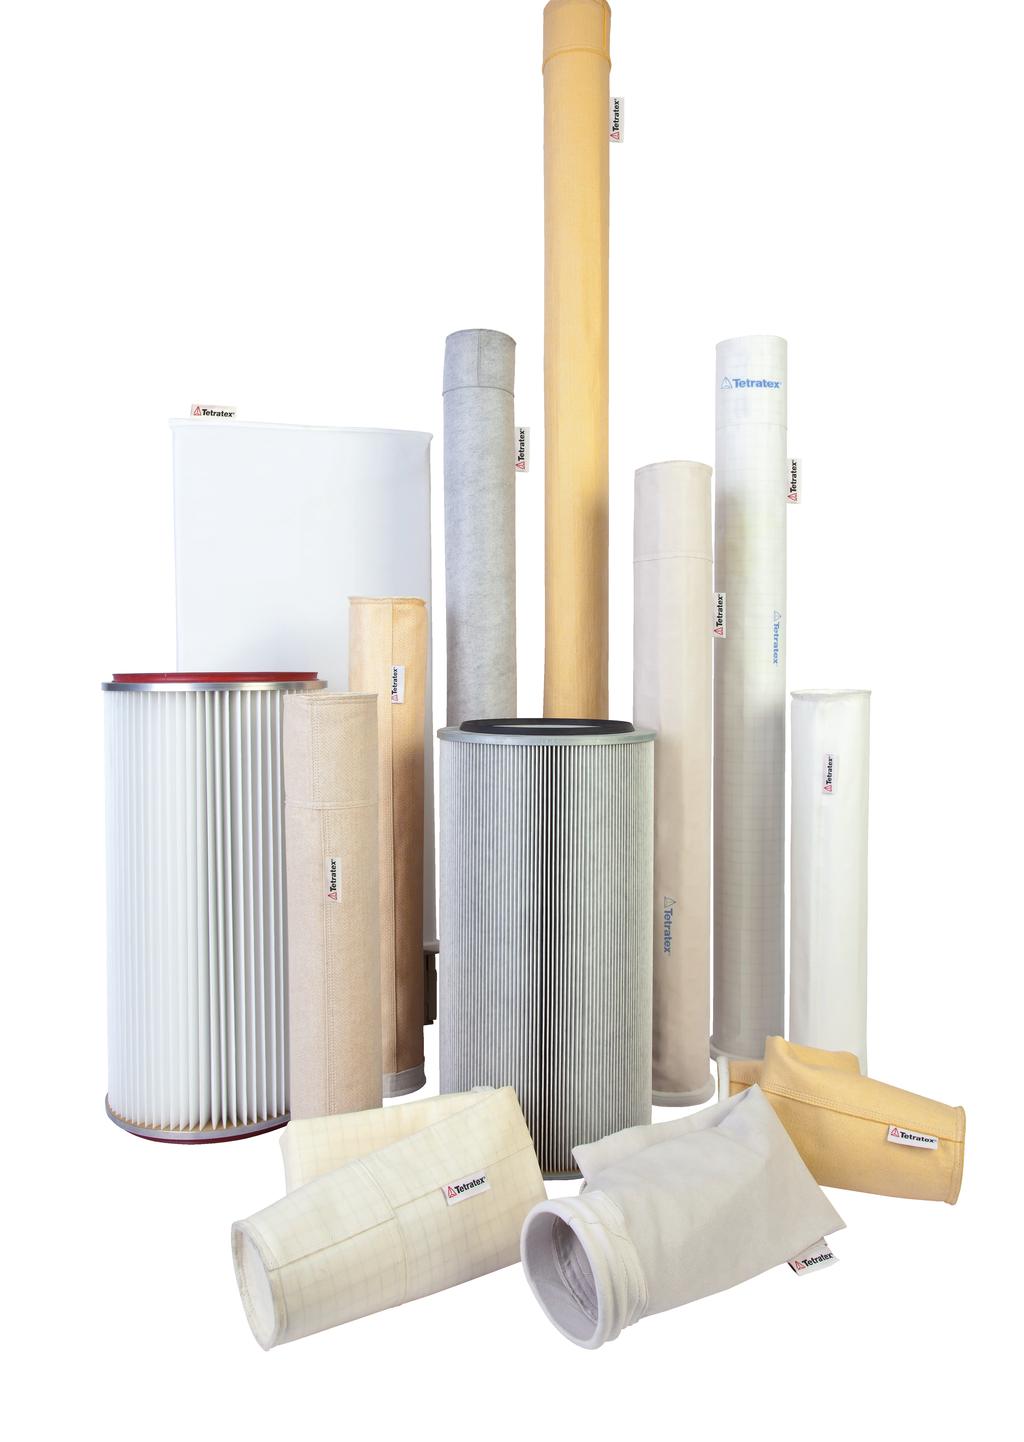 about donaldson membranes Donaldson Membranes is a leading worldwide manufacturer of expanded microporous PTFE membranes, films and laminates.